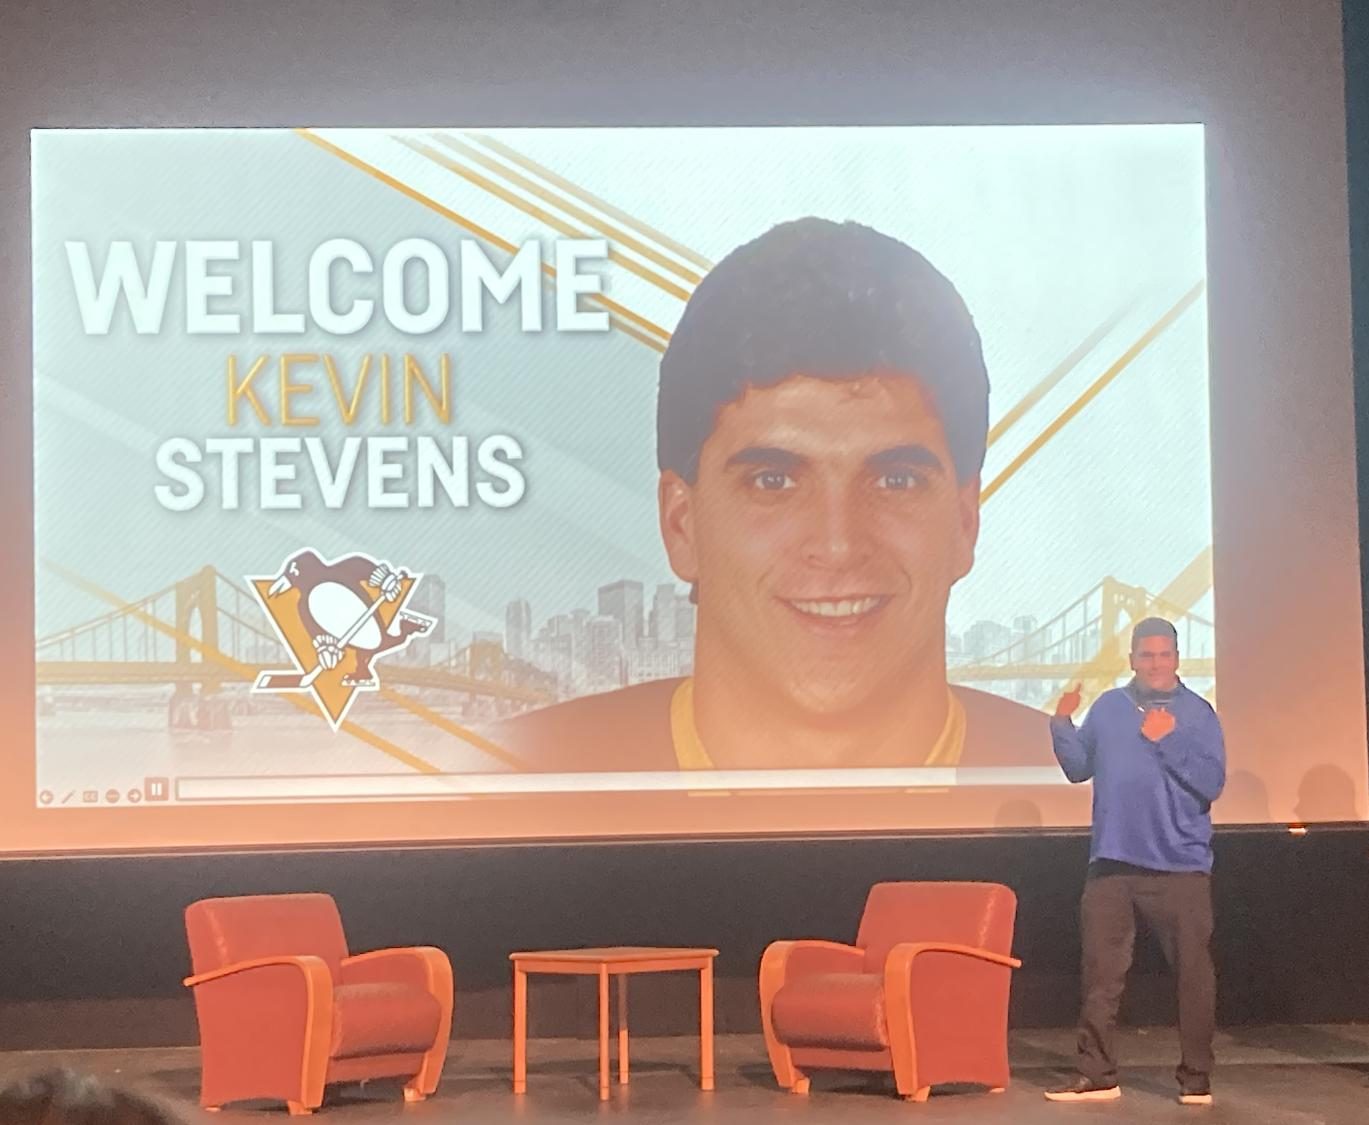 After epic rise and fall, Massachusetts hockey great Kevin Stevens